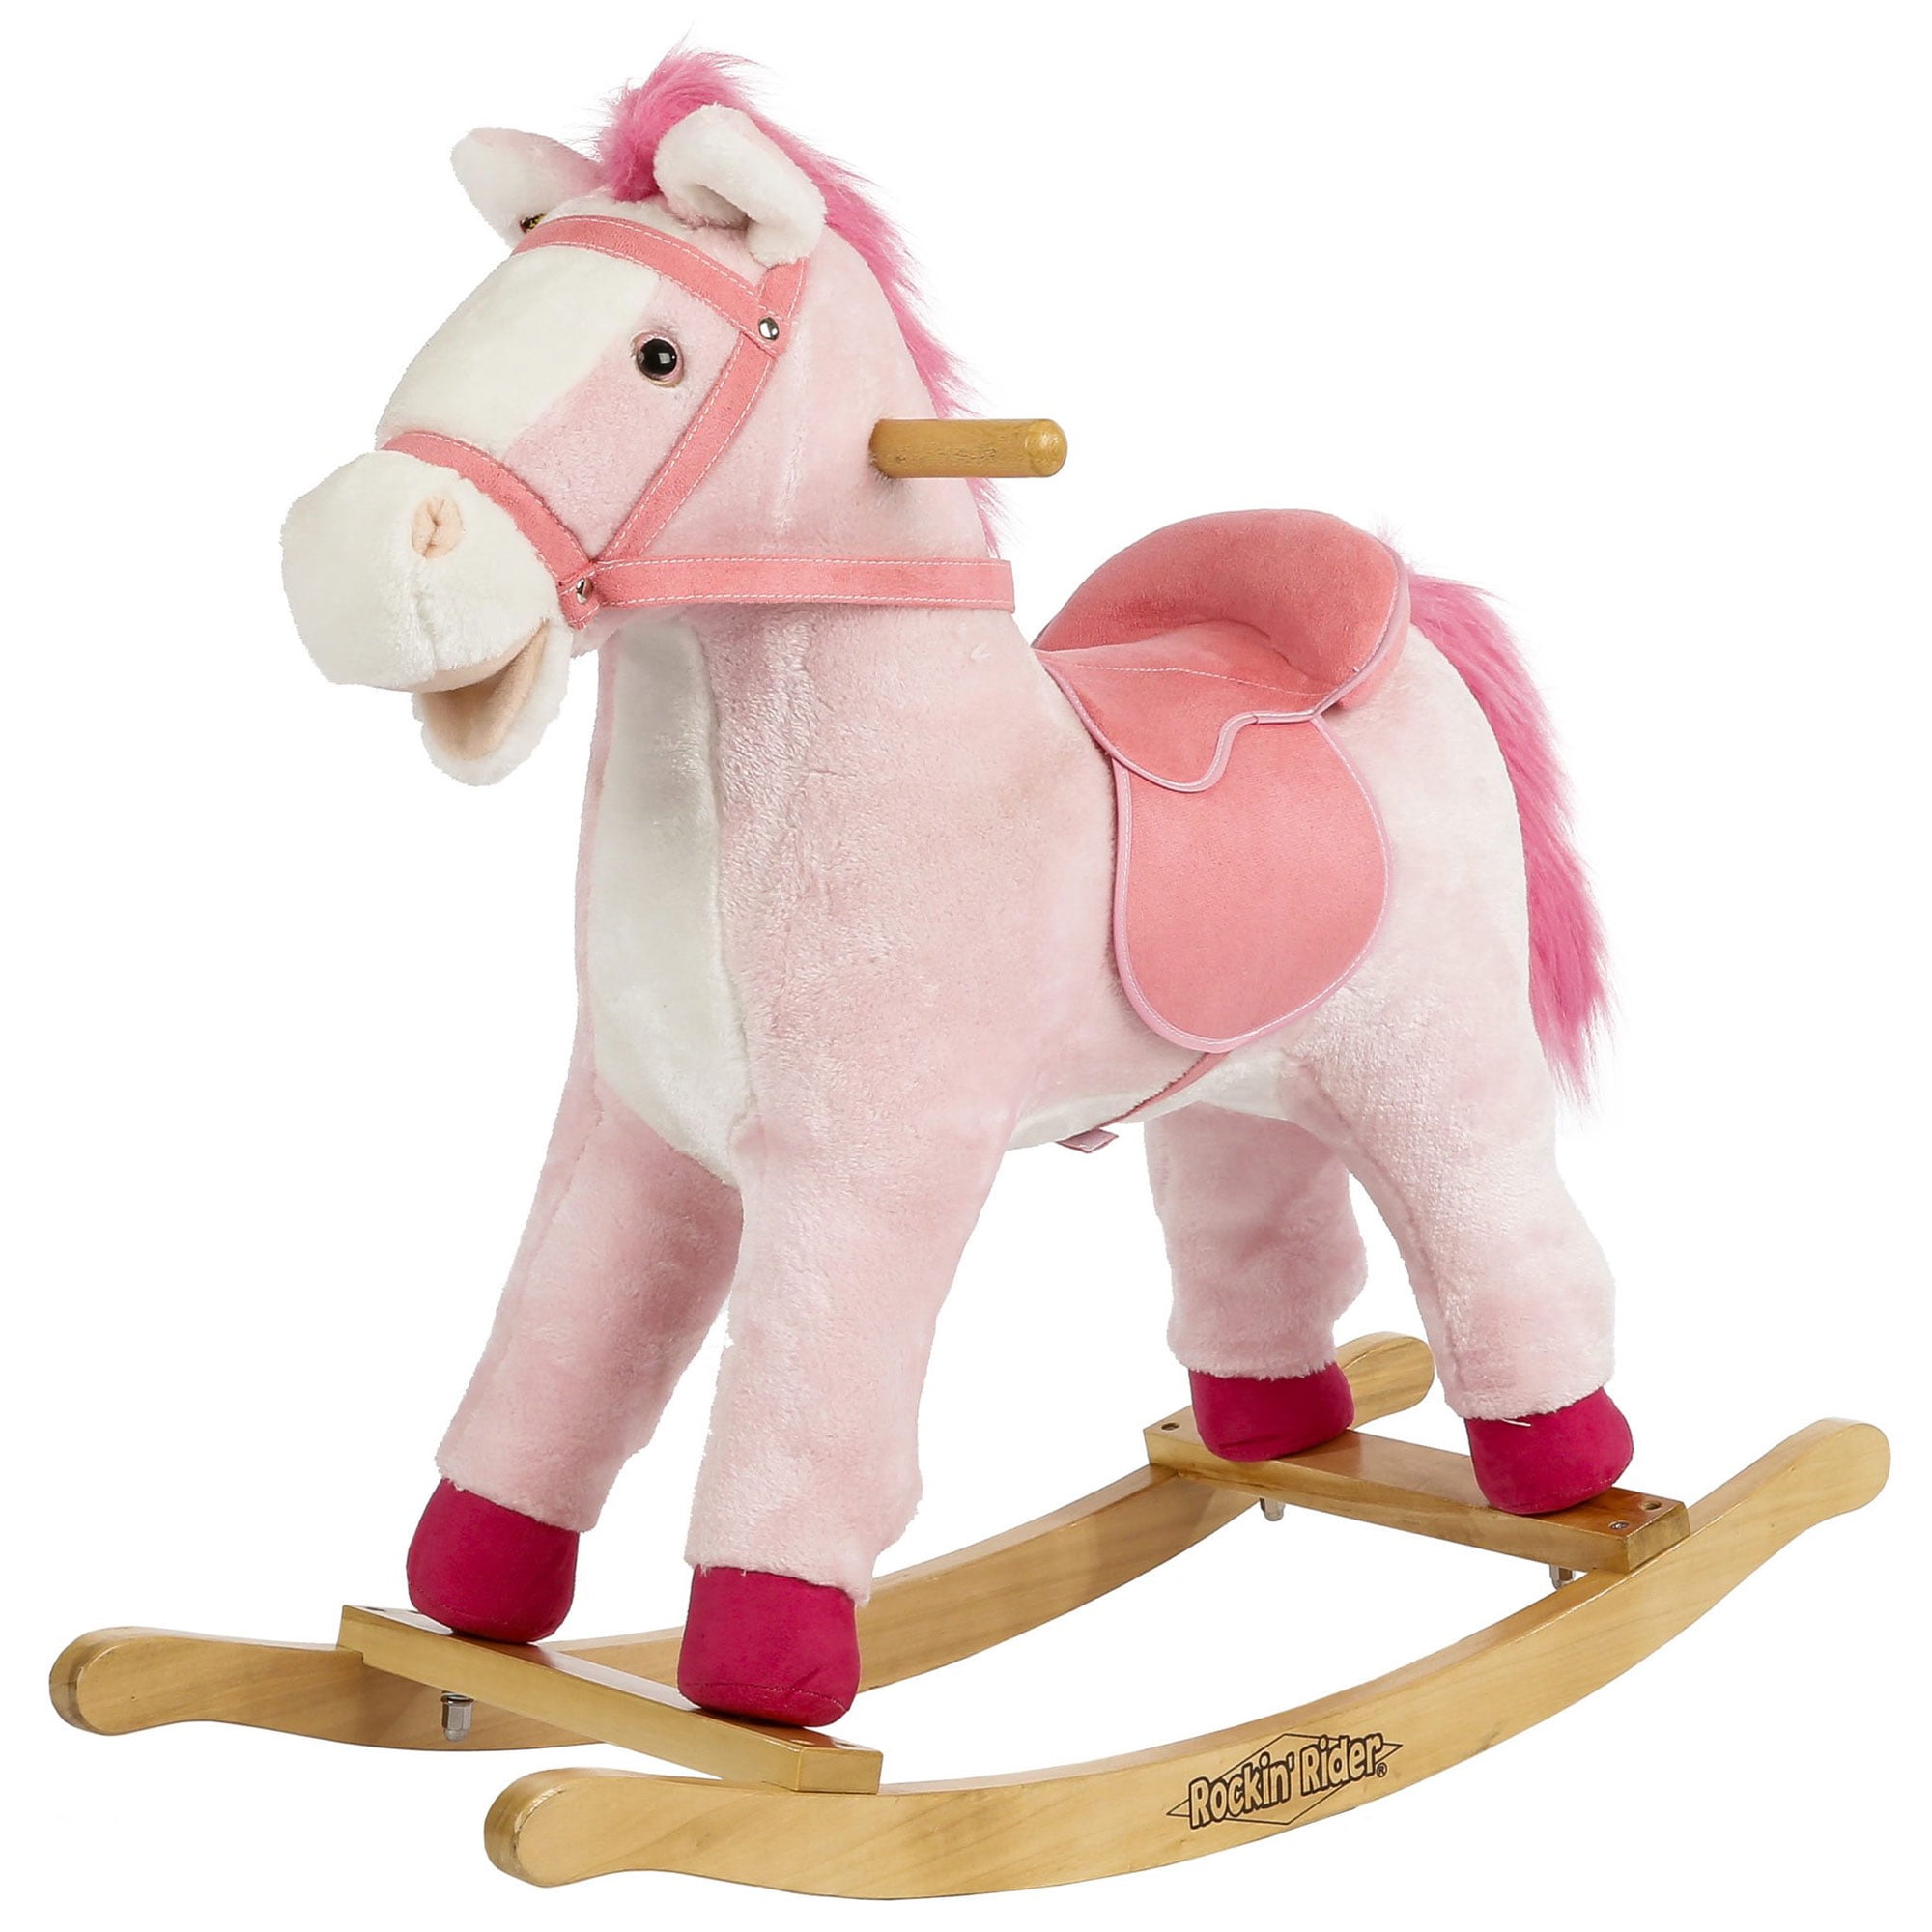 Rockin' Rider Charger 2in1 Pony Rideon for sale online 